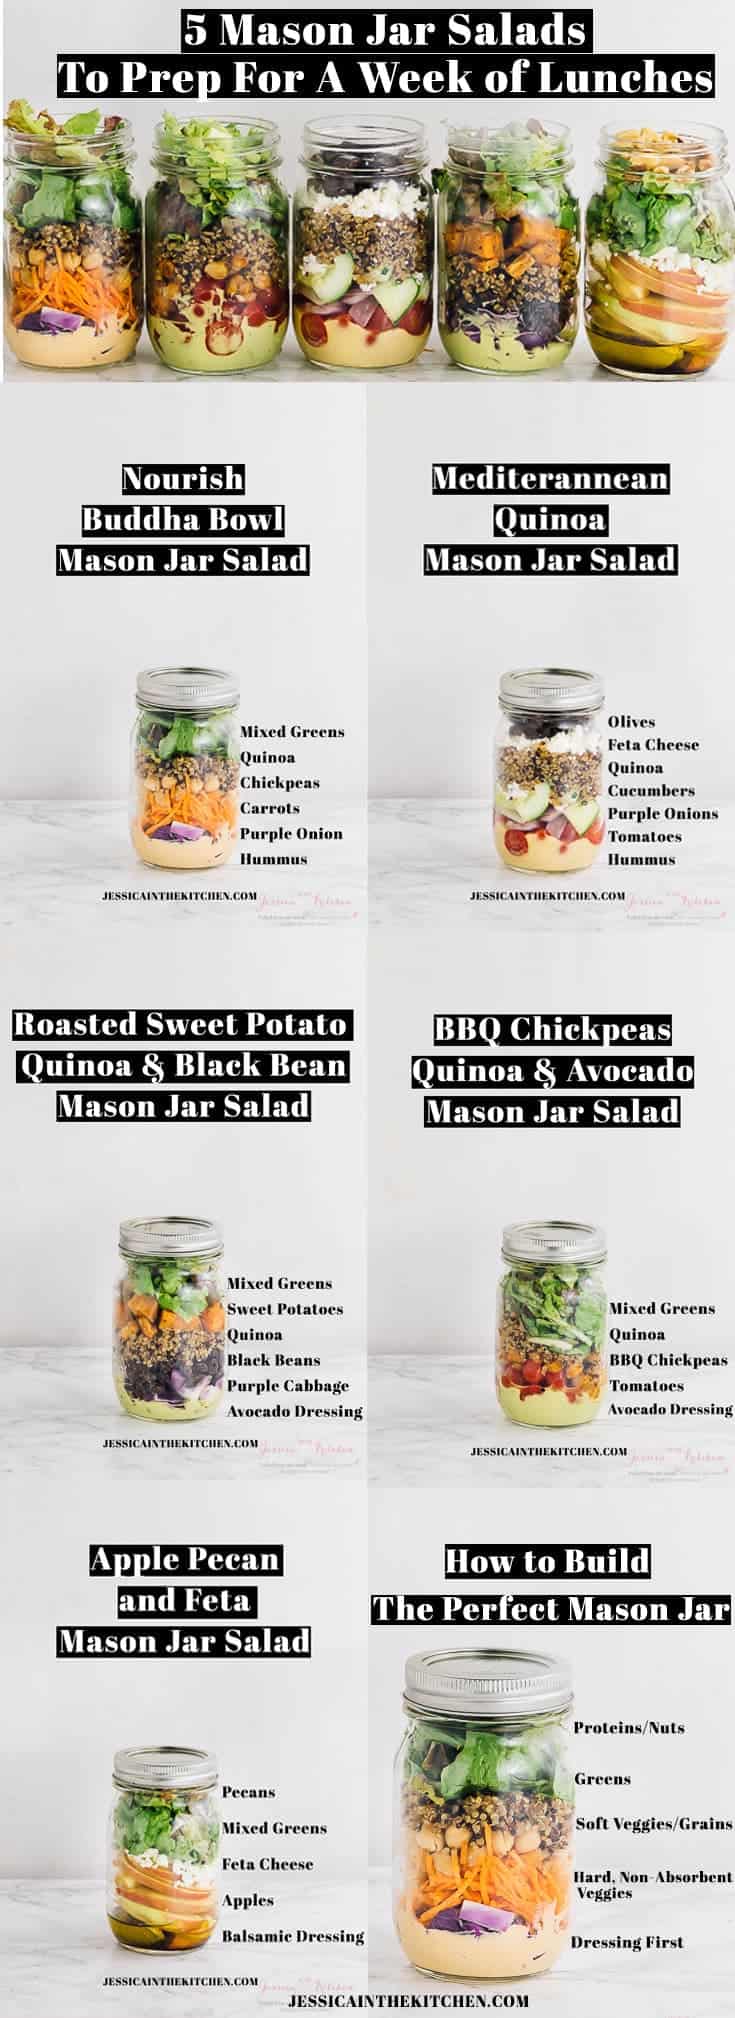 https://jessicainthekitchen.com/wp-content/uploads/2017/01/5-Mason-Jar-Salads-To-Meal-Prep-for-a-Week-of-Lunches-LONG-PIN-2.jpg